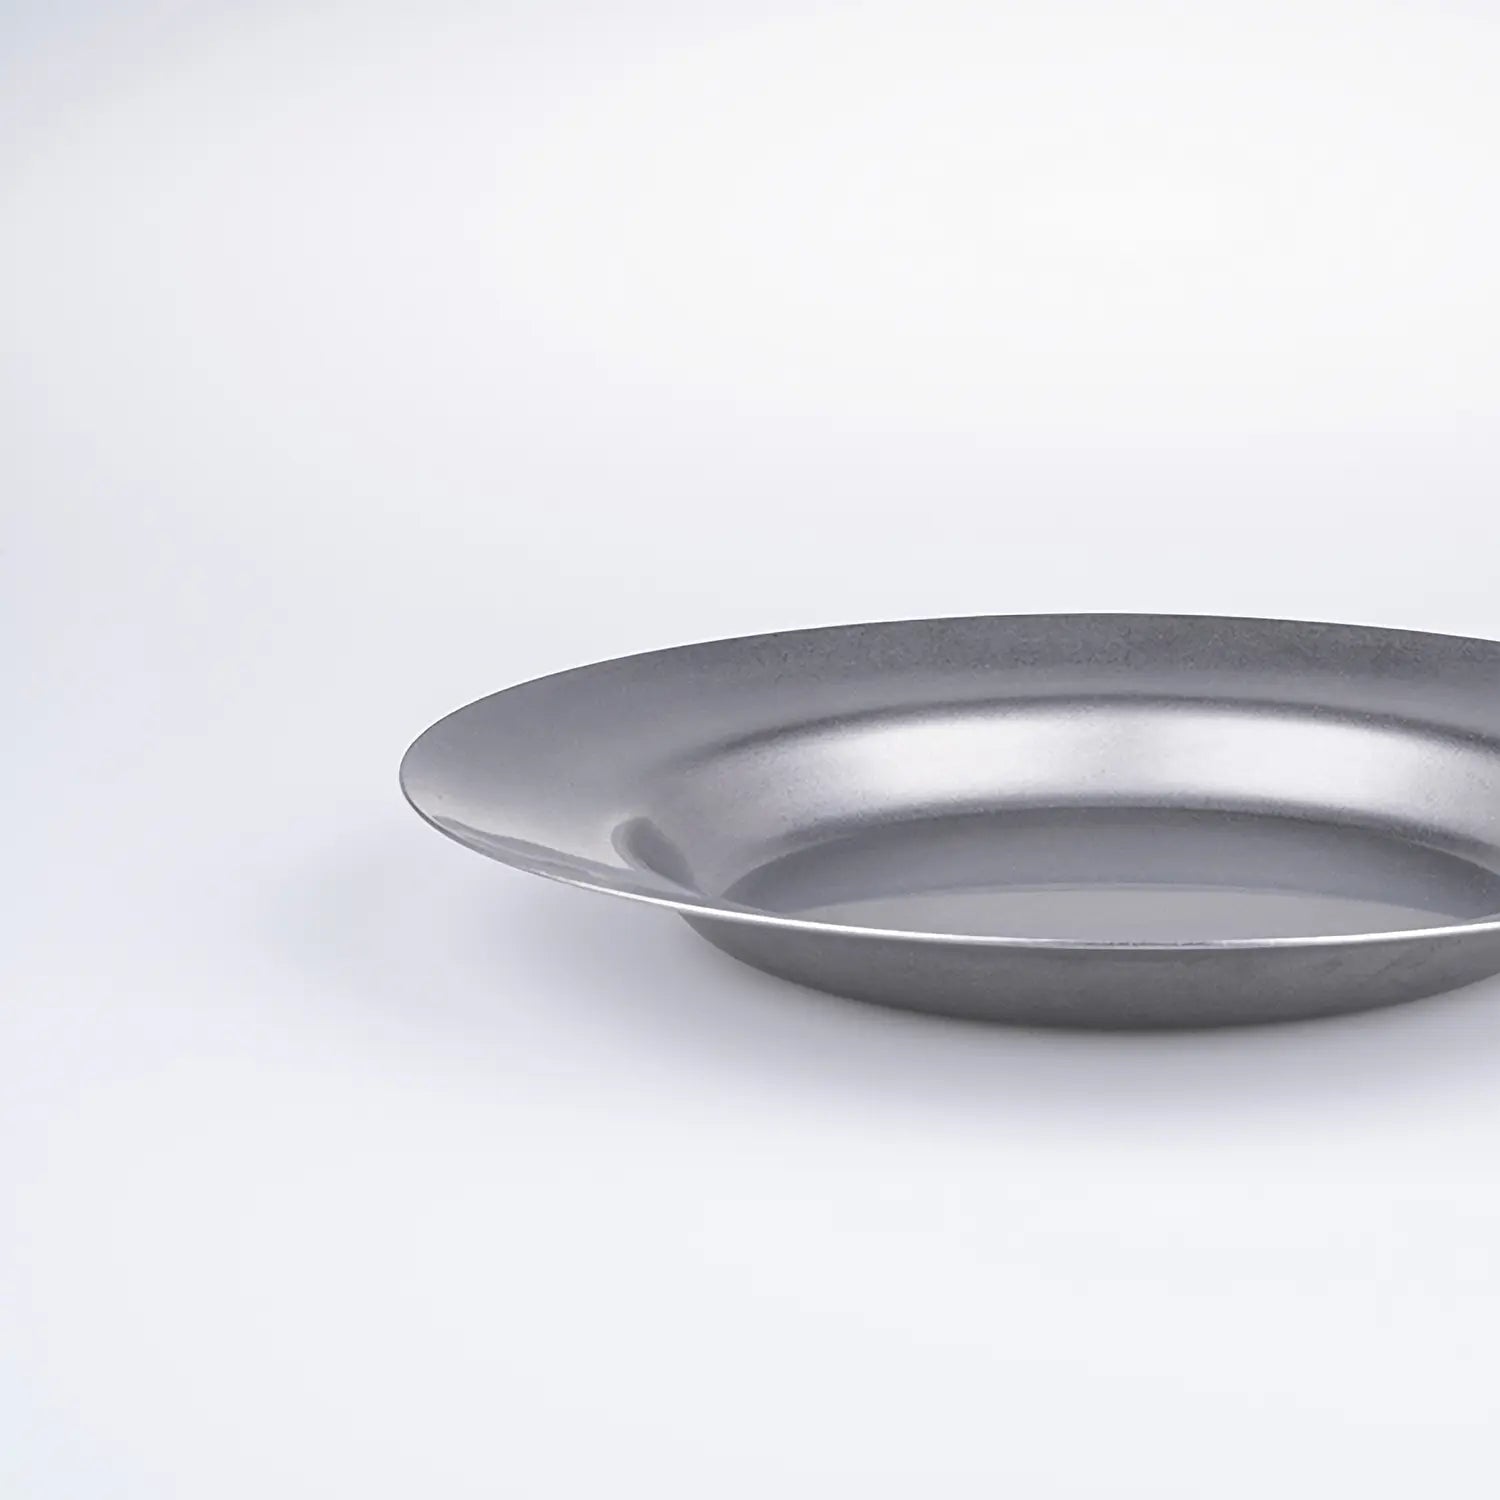 Stainless Steel Plate, Small Oval Food Dish Stainless Steel